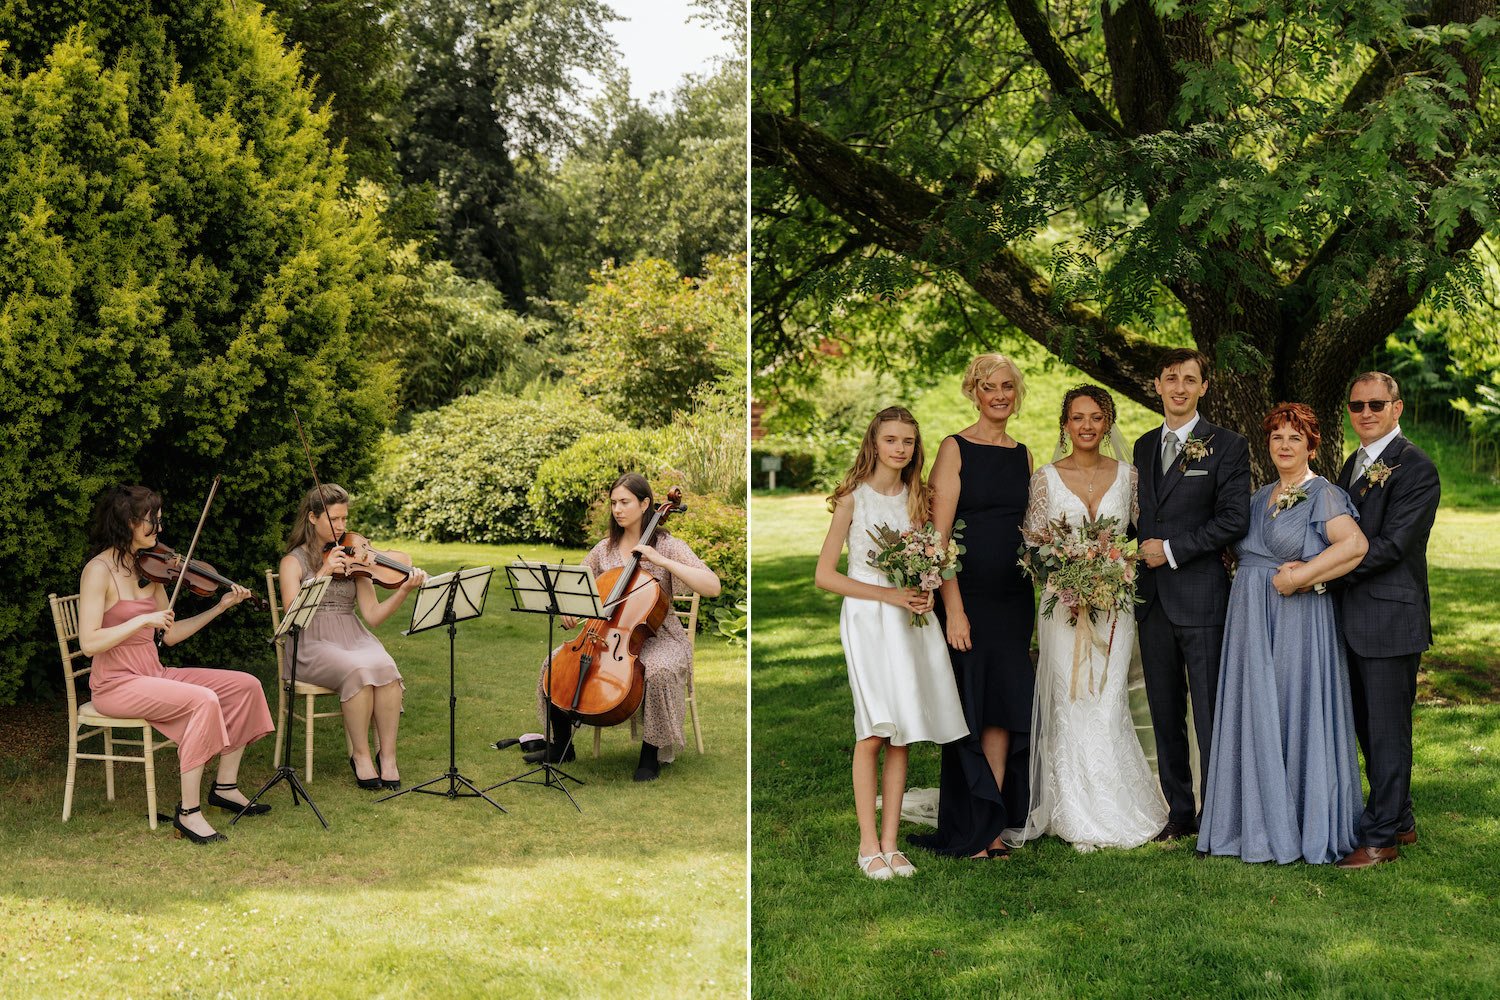 Wedding chamber orchestra and family group photo